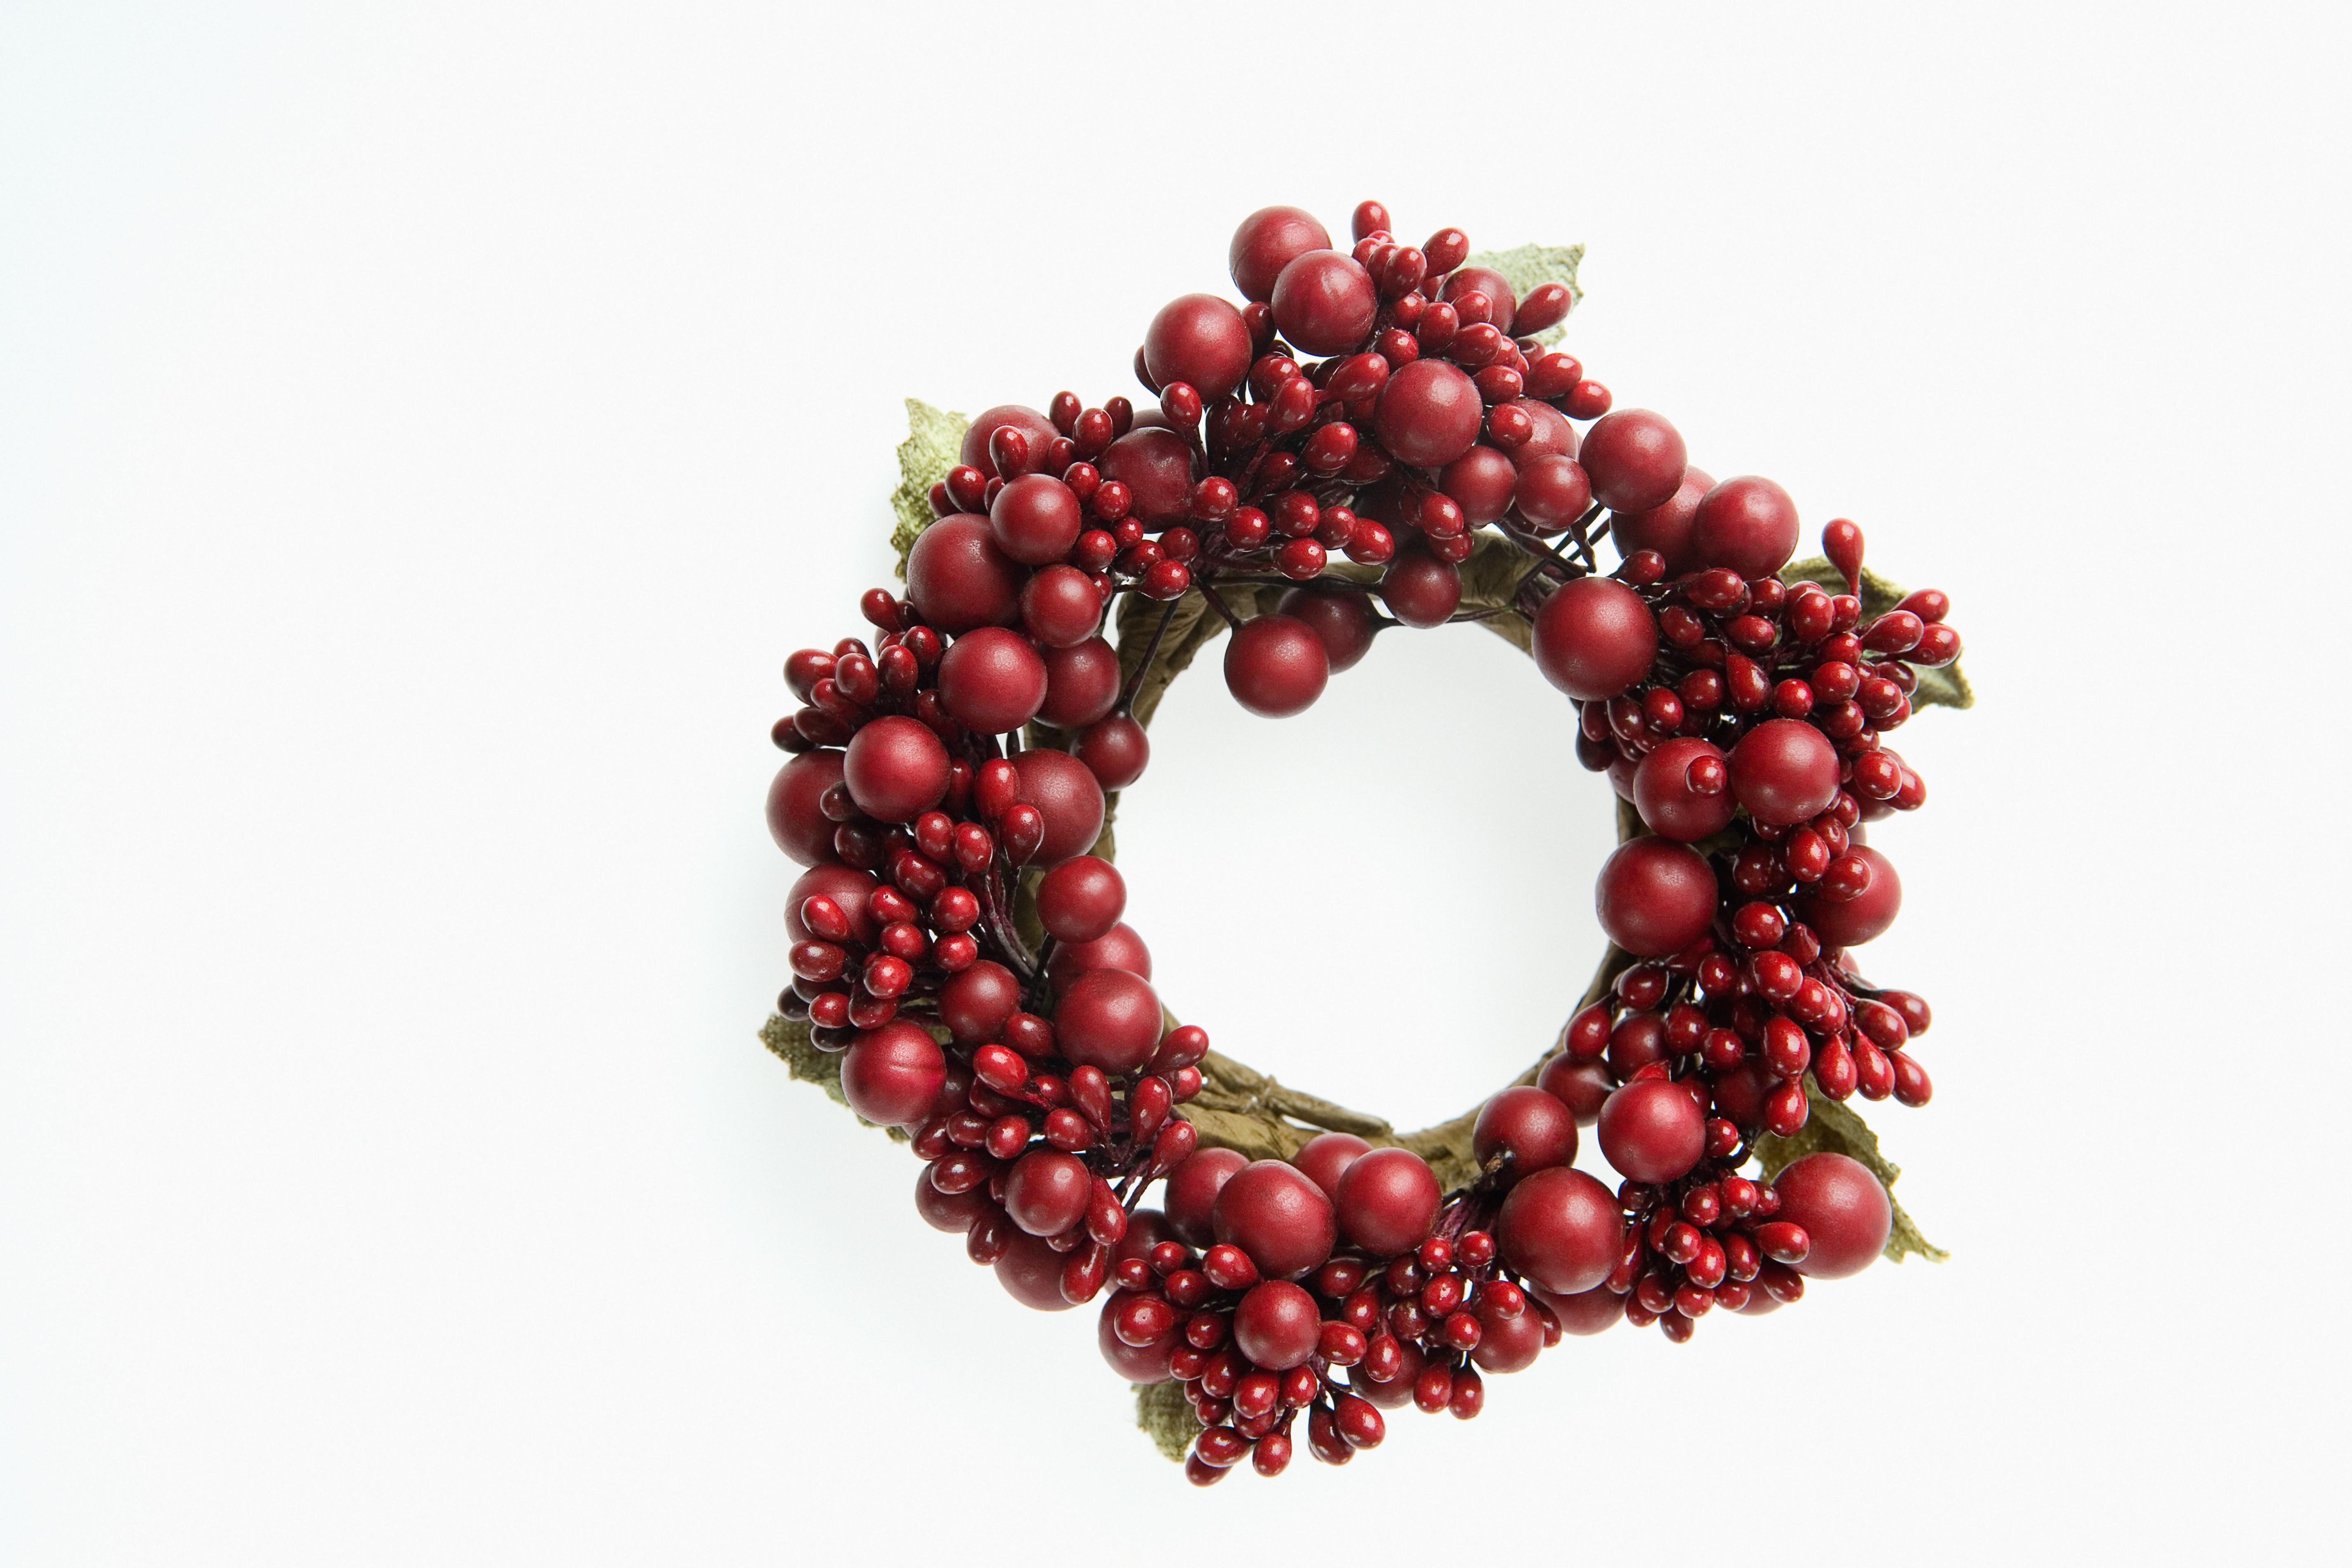 Red berries on wreath